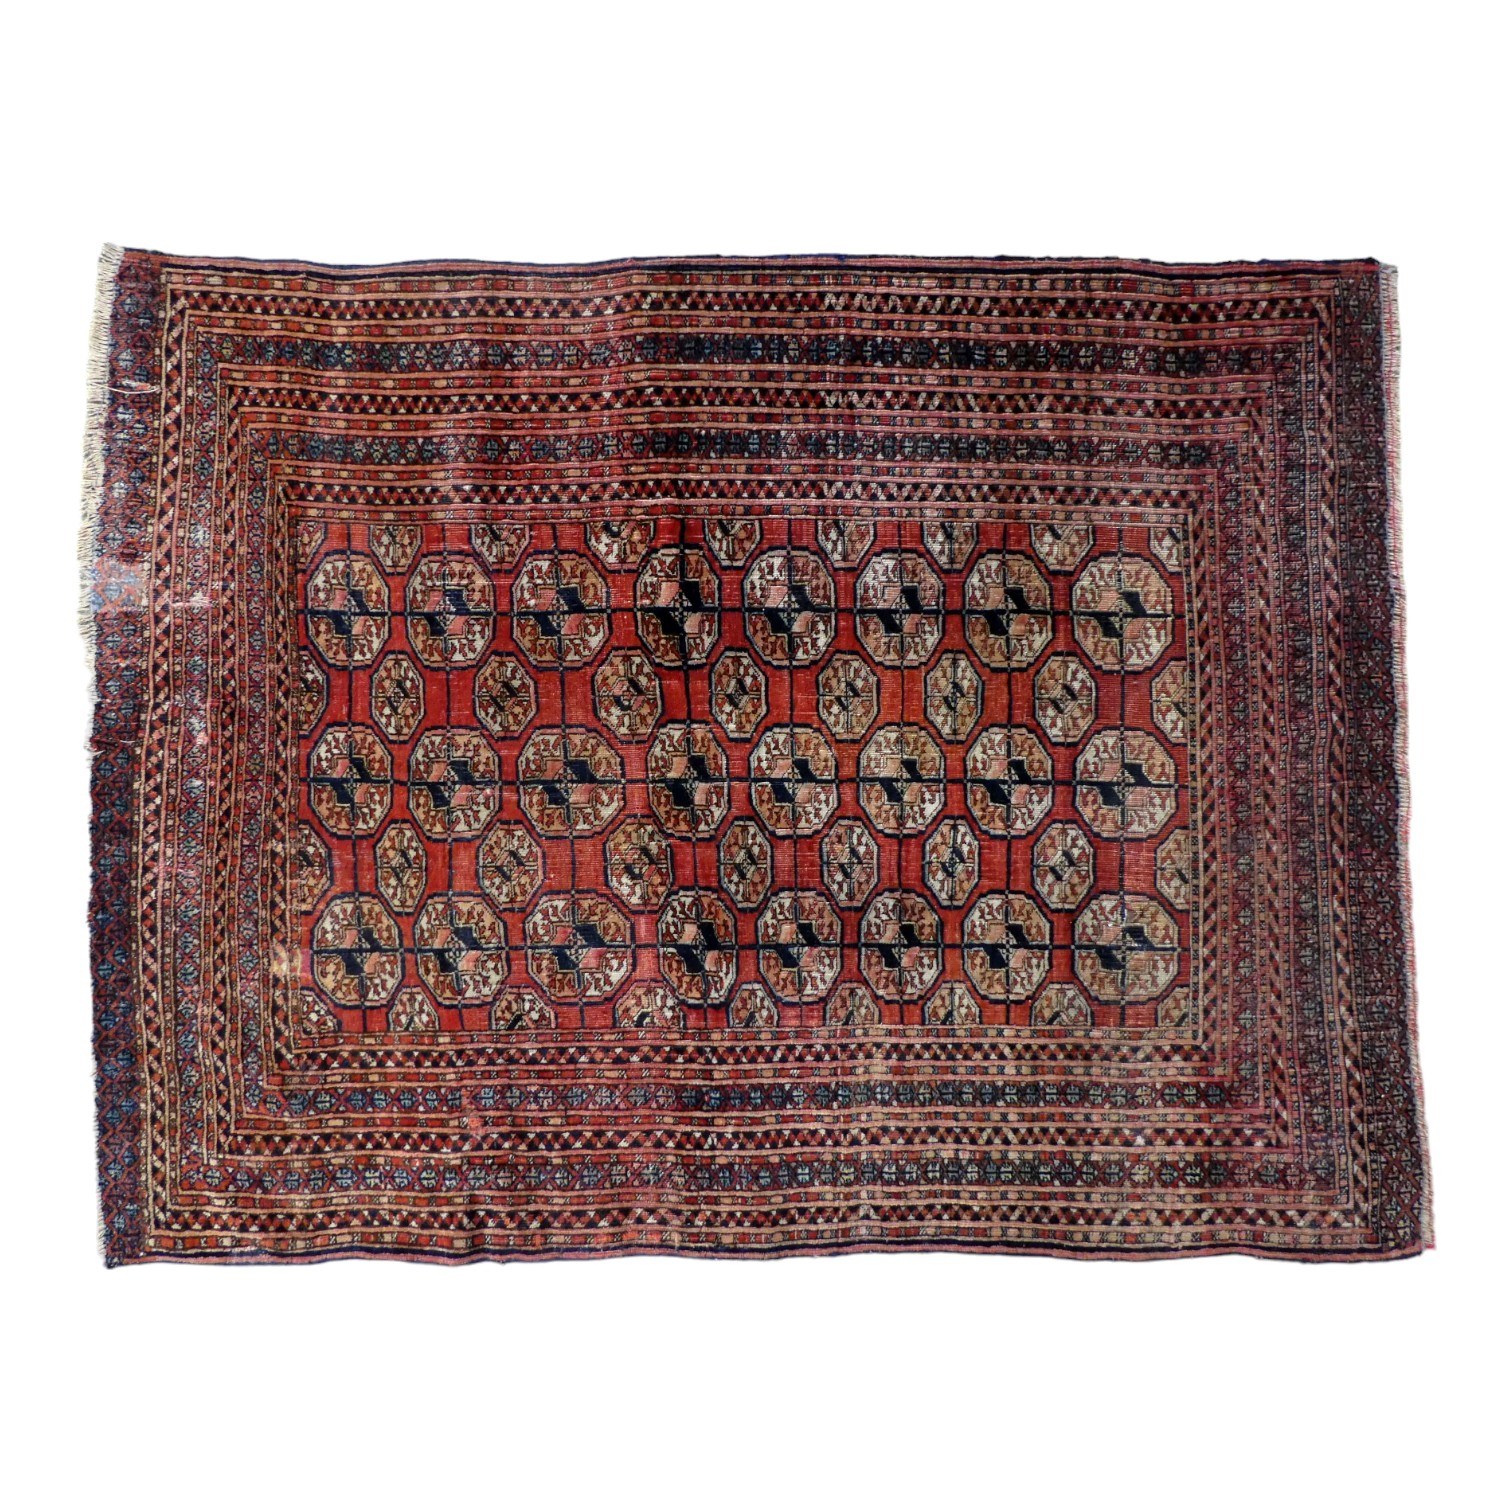 A Bokhara rug - decorated with an arrangement of gul motifs on a red ground, the border with